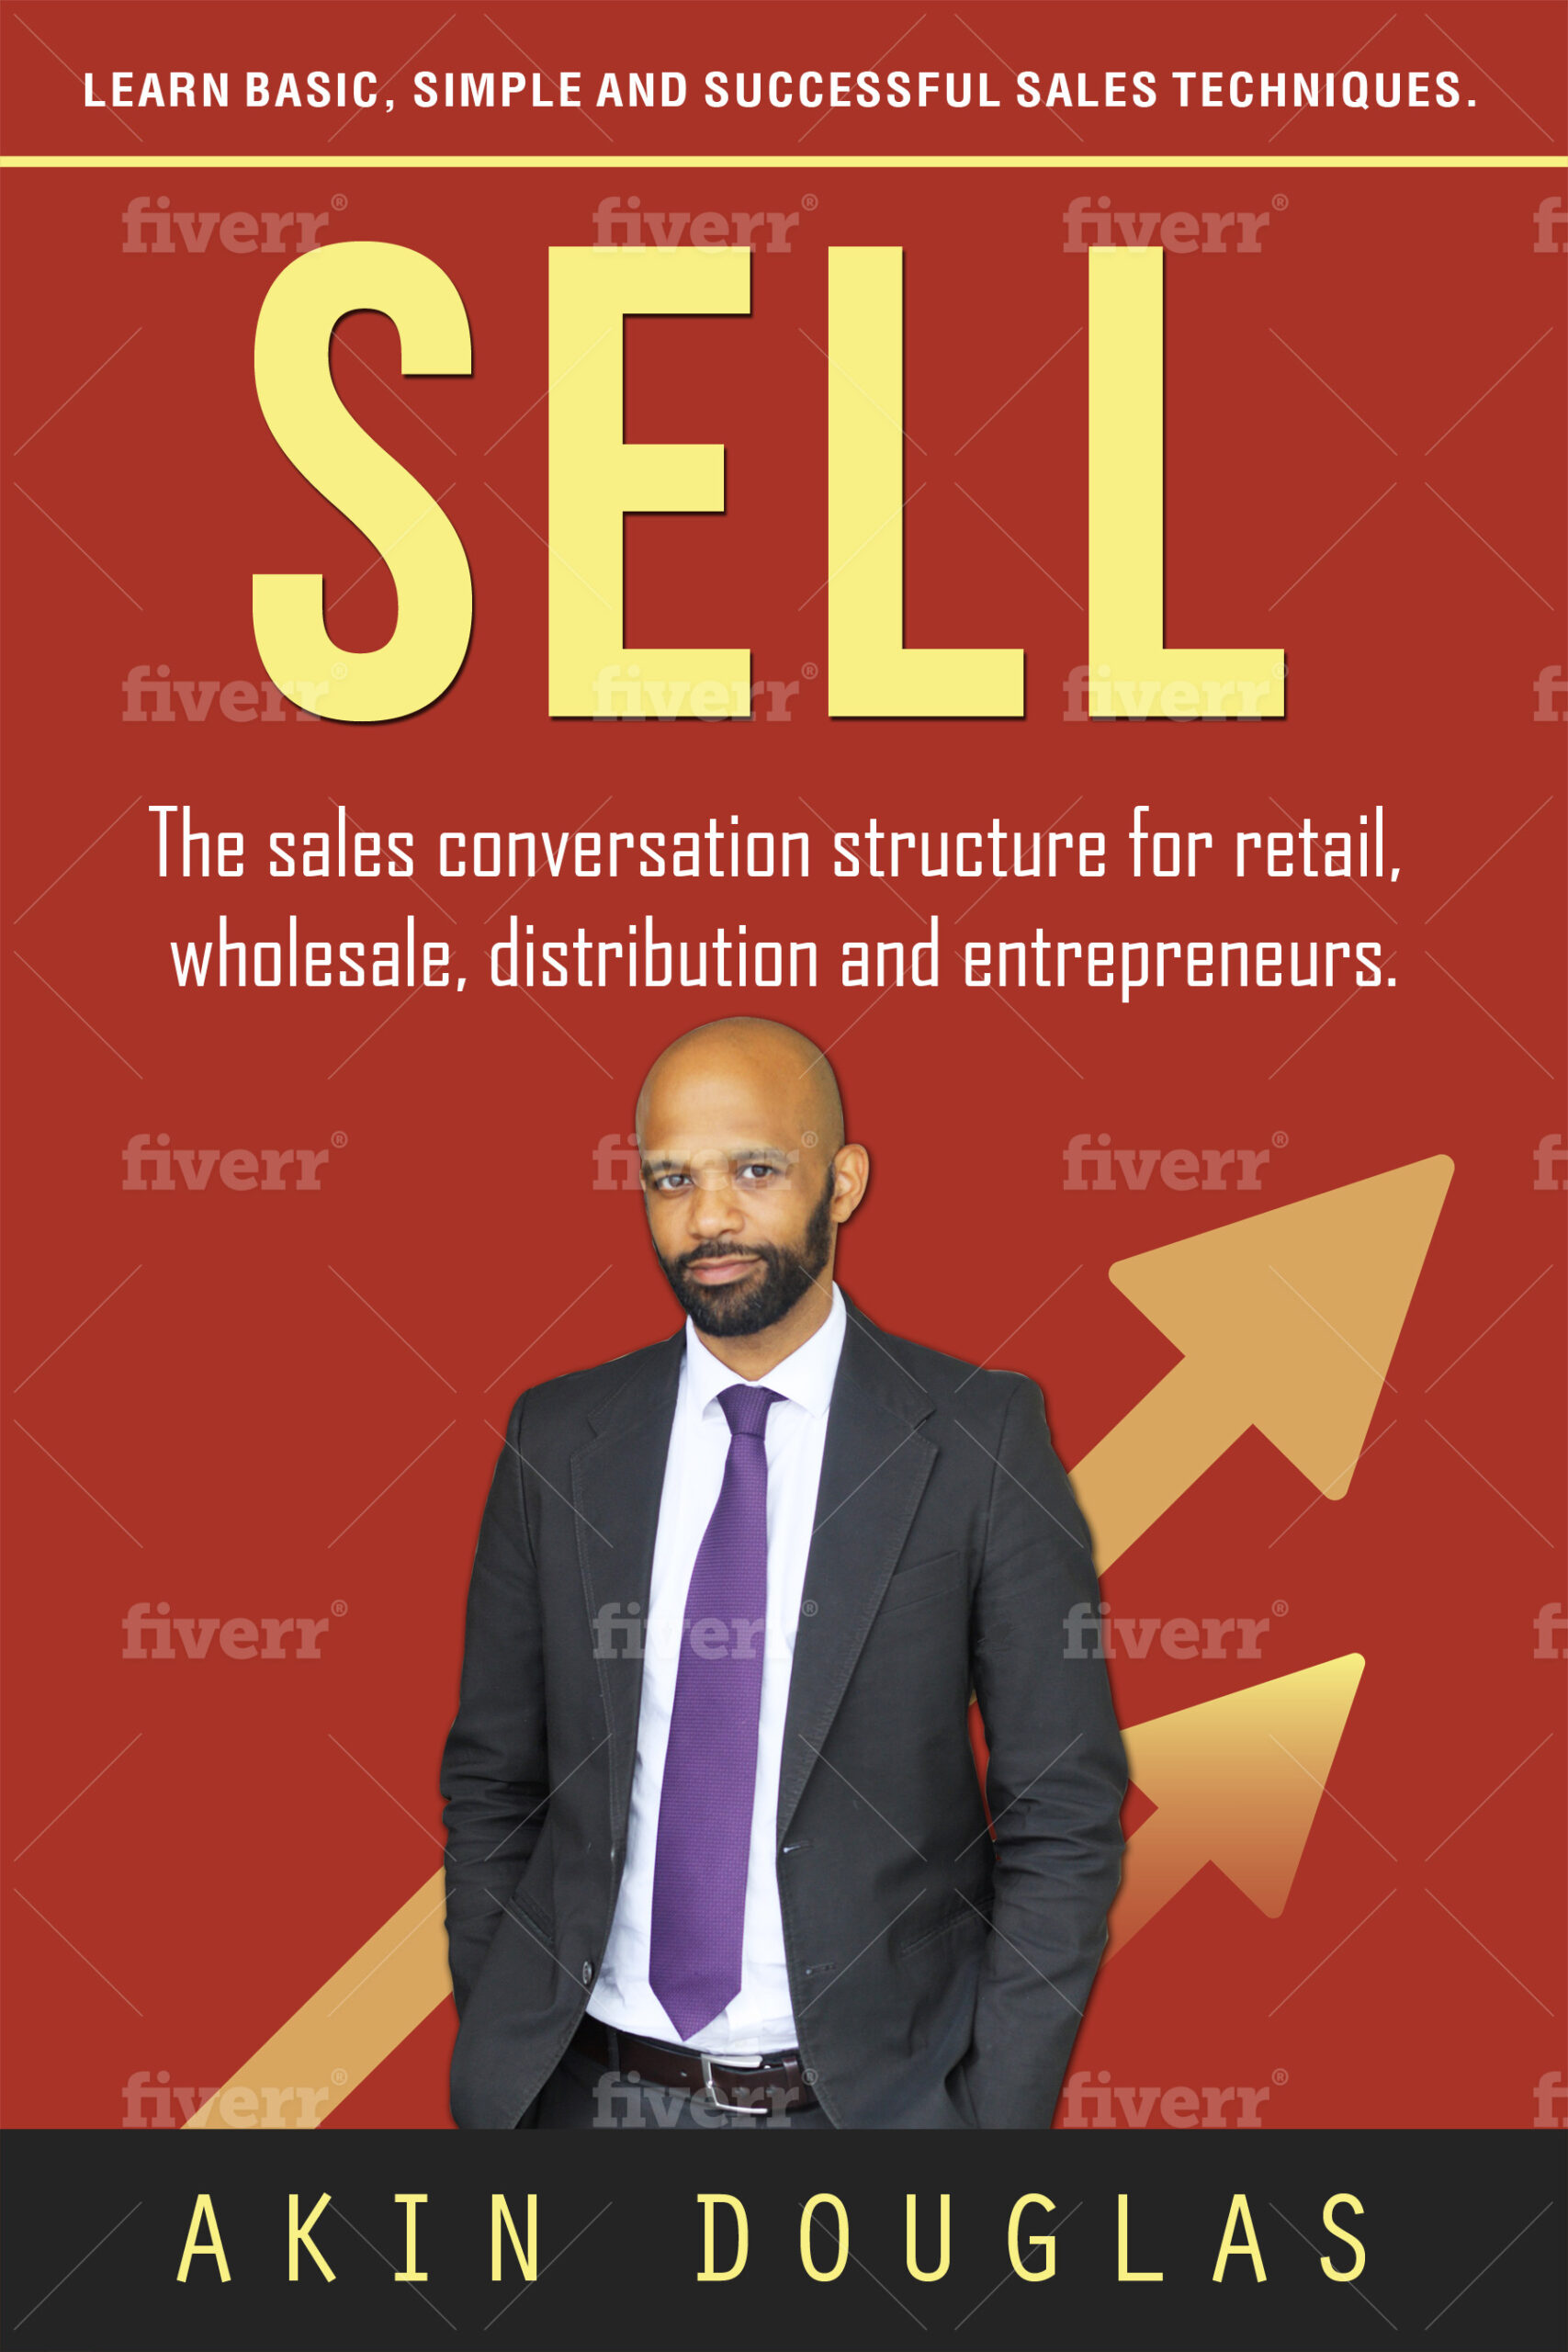 FREE: SELL: The sales conversation structure for retail, wholesale, distribution and entrepreneurs: Learn basic, simple and successful sales techniques by Akin Douglas